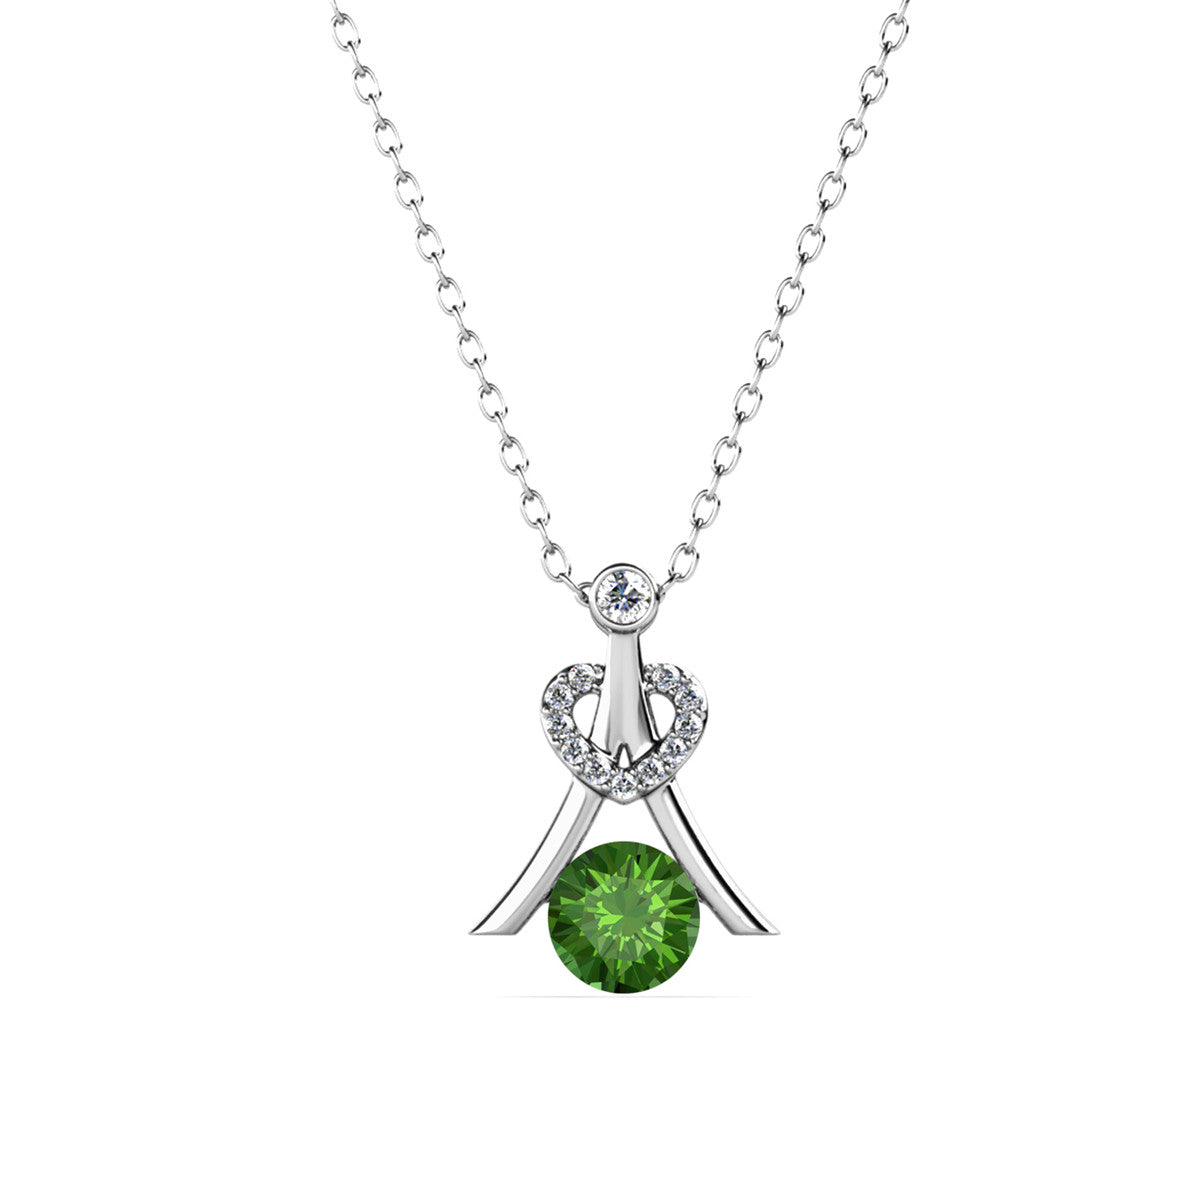 Serenity August Birthstone Peridot Necklace, 18k White Gold Plated Silver Necklace with Round Cut Crystals